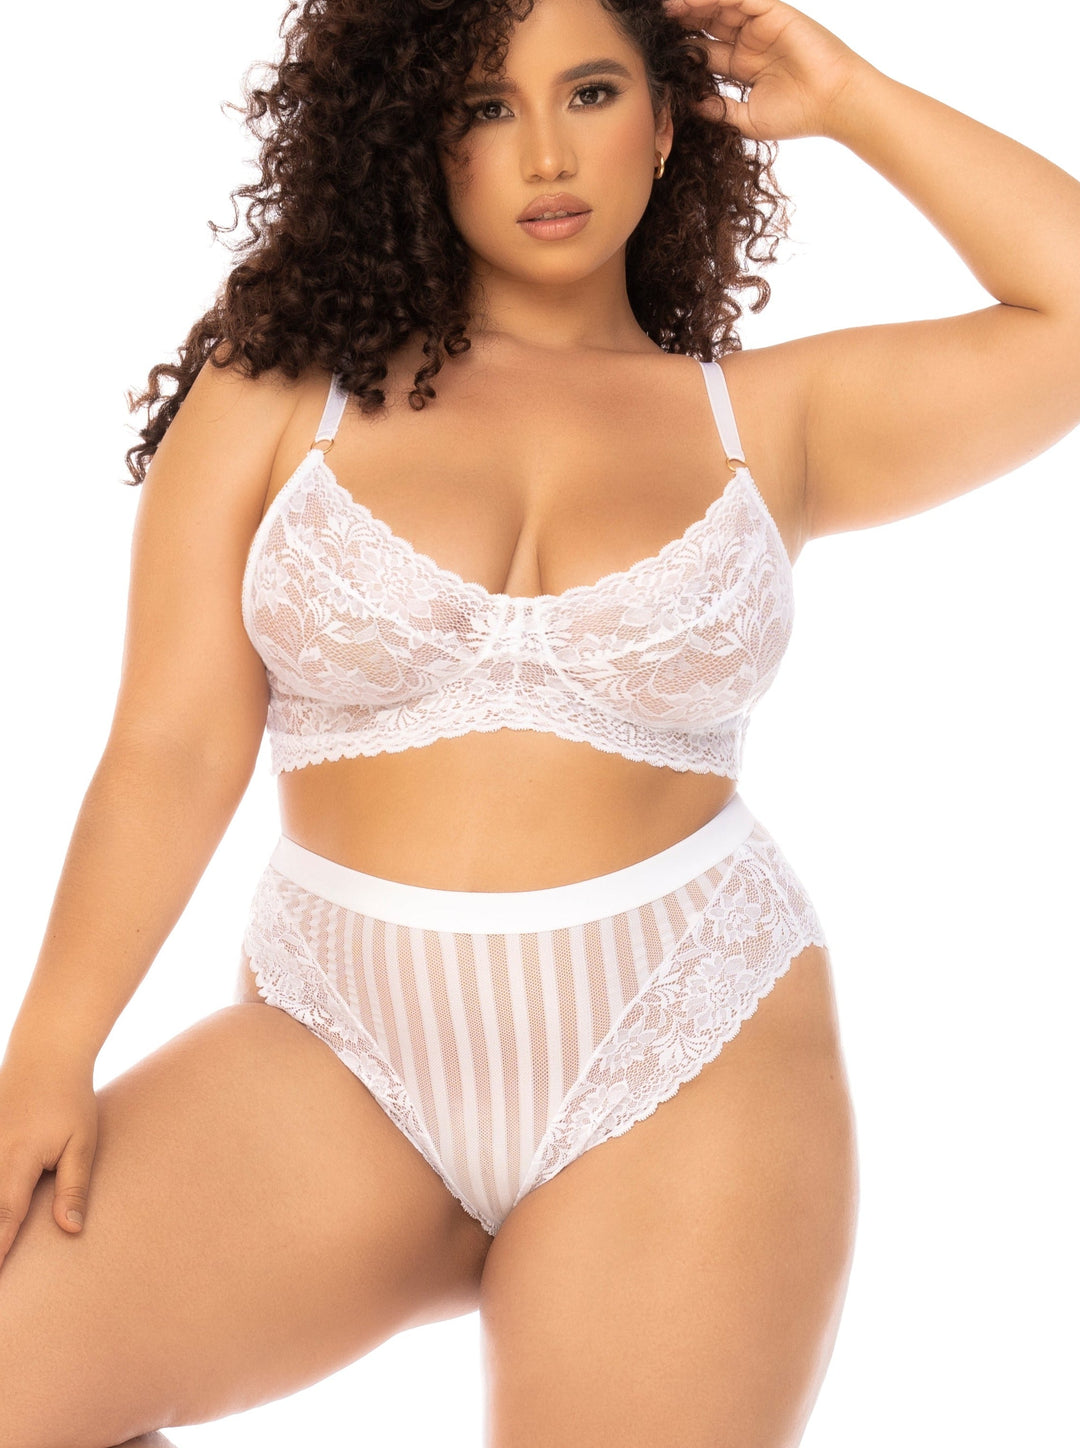 Mapale Queen Emberly Bridal Floral Lace Striped Mesh Bra Set White